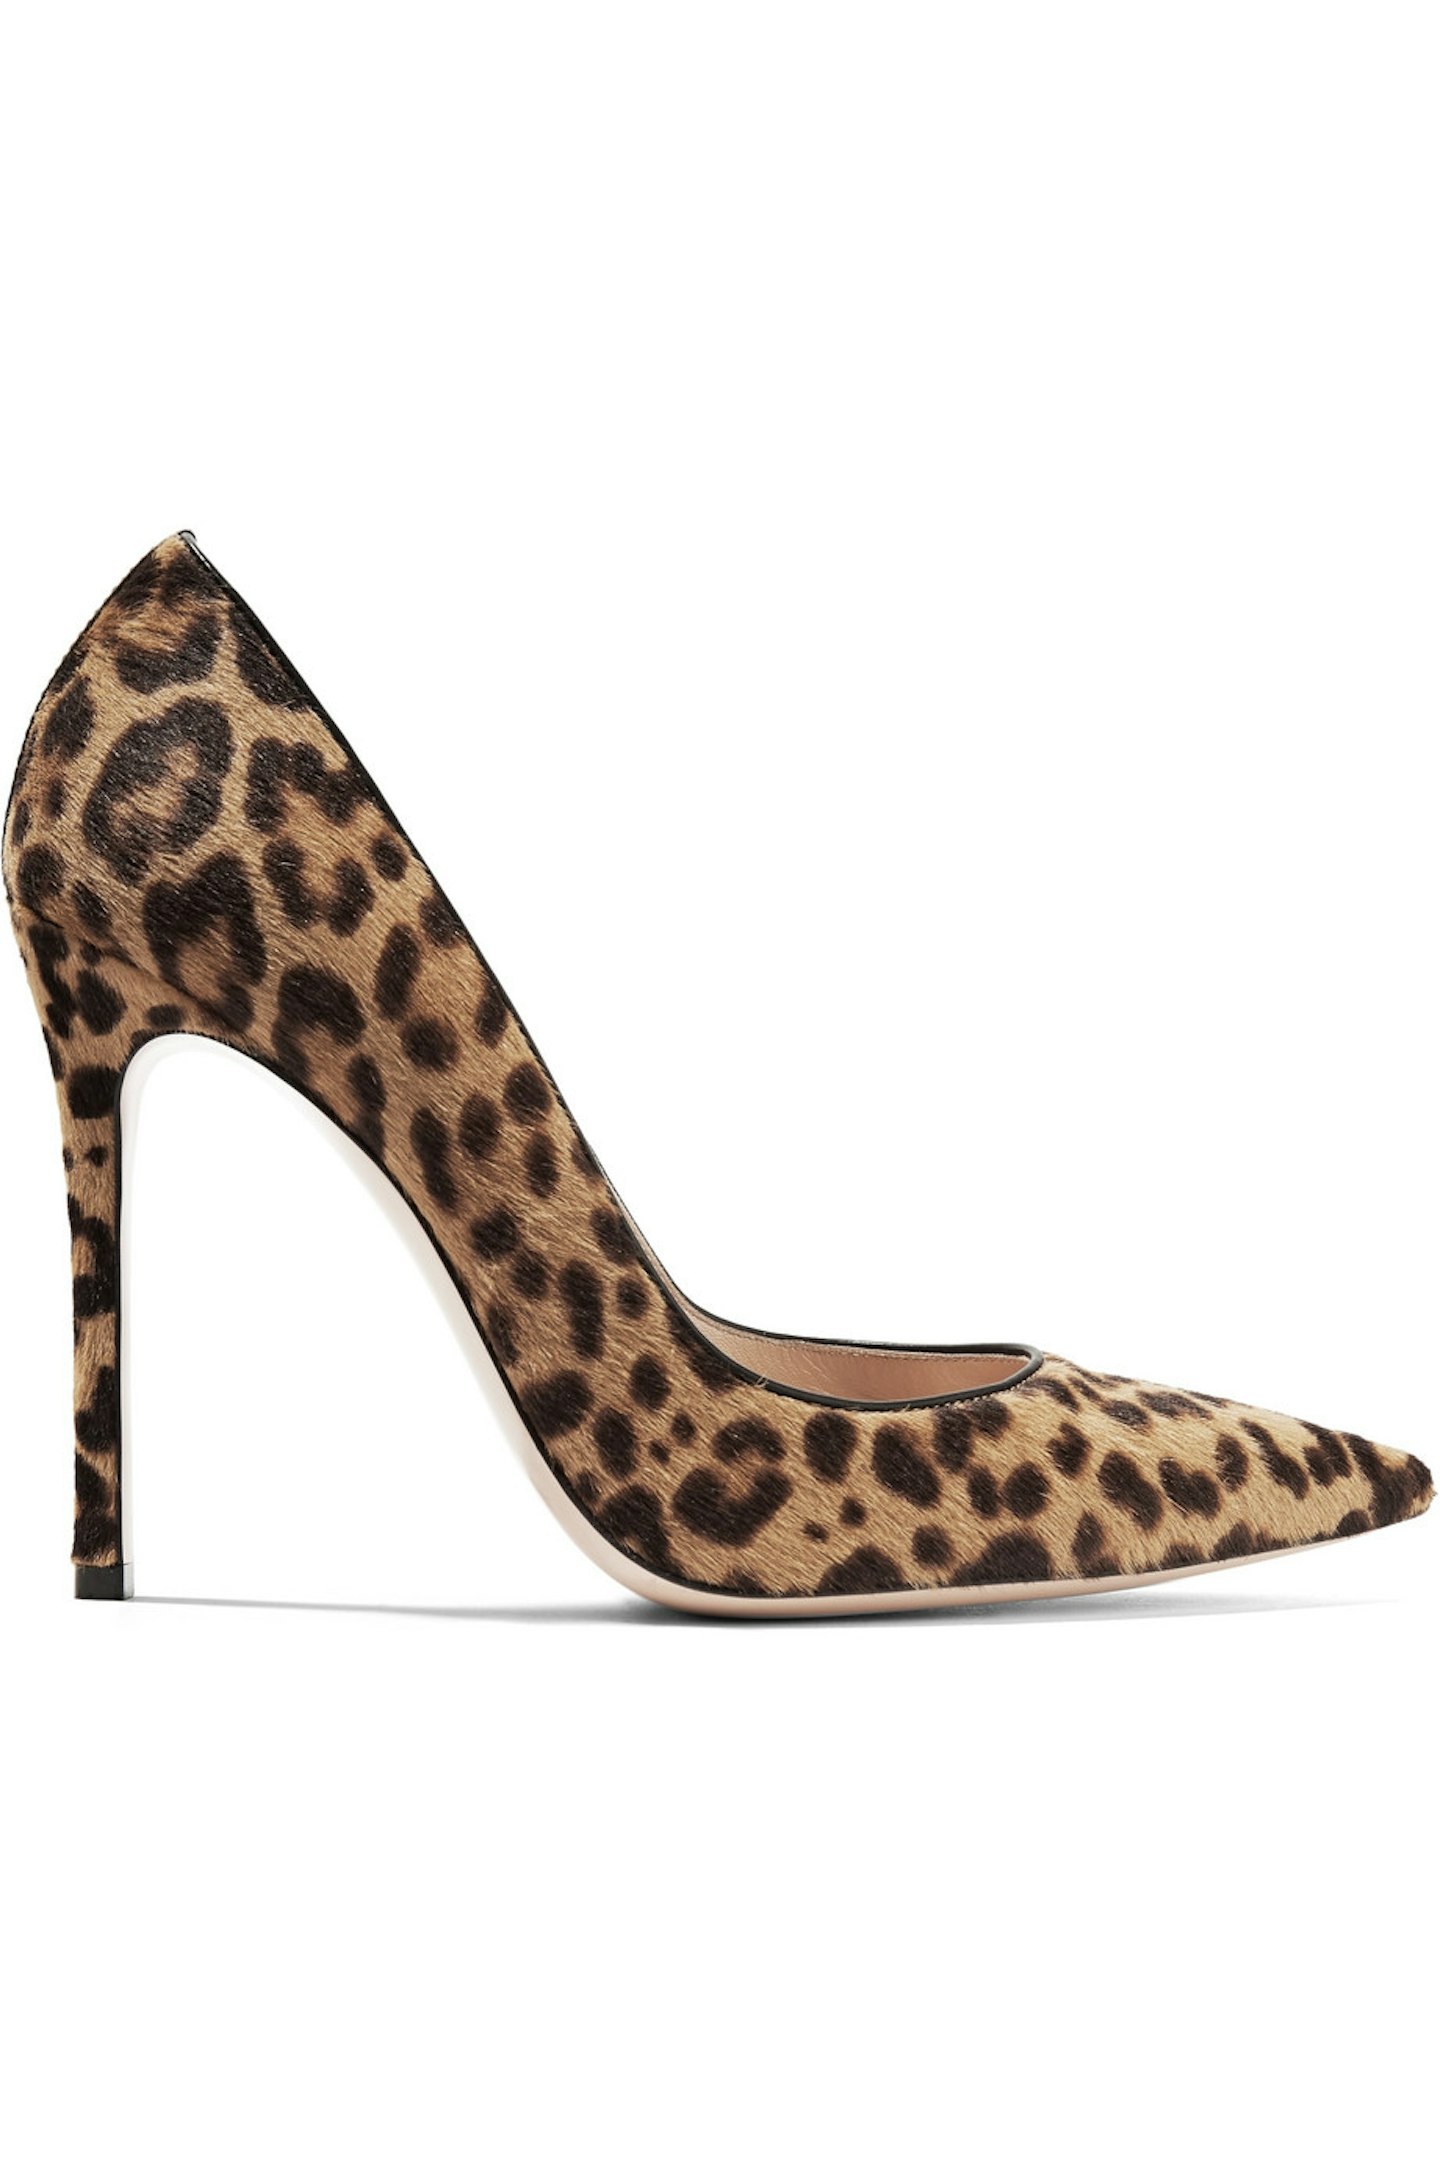 What to wear to 4 day week work gianvito rossi